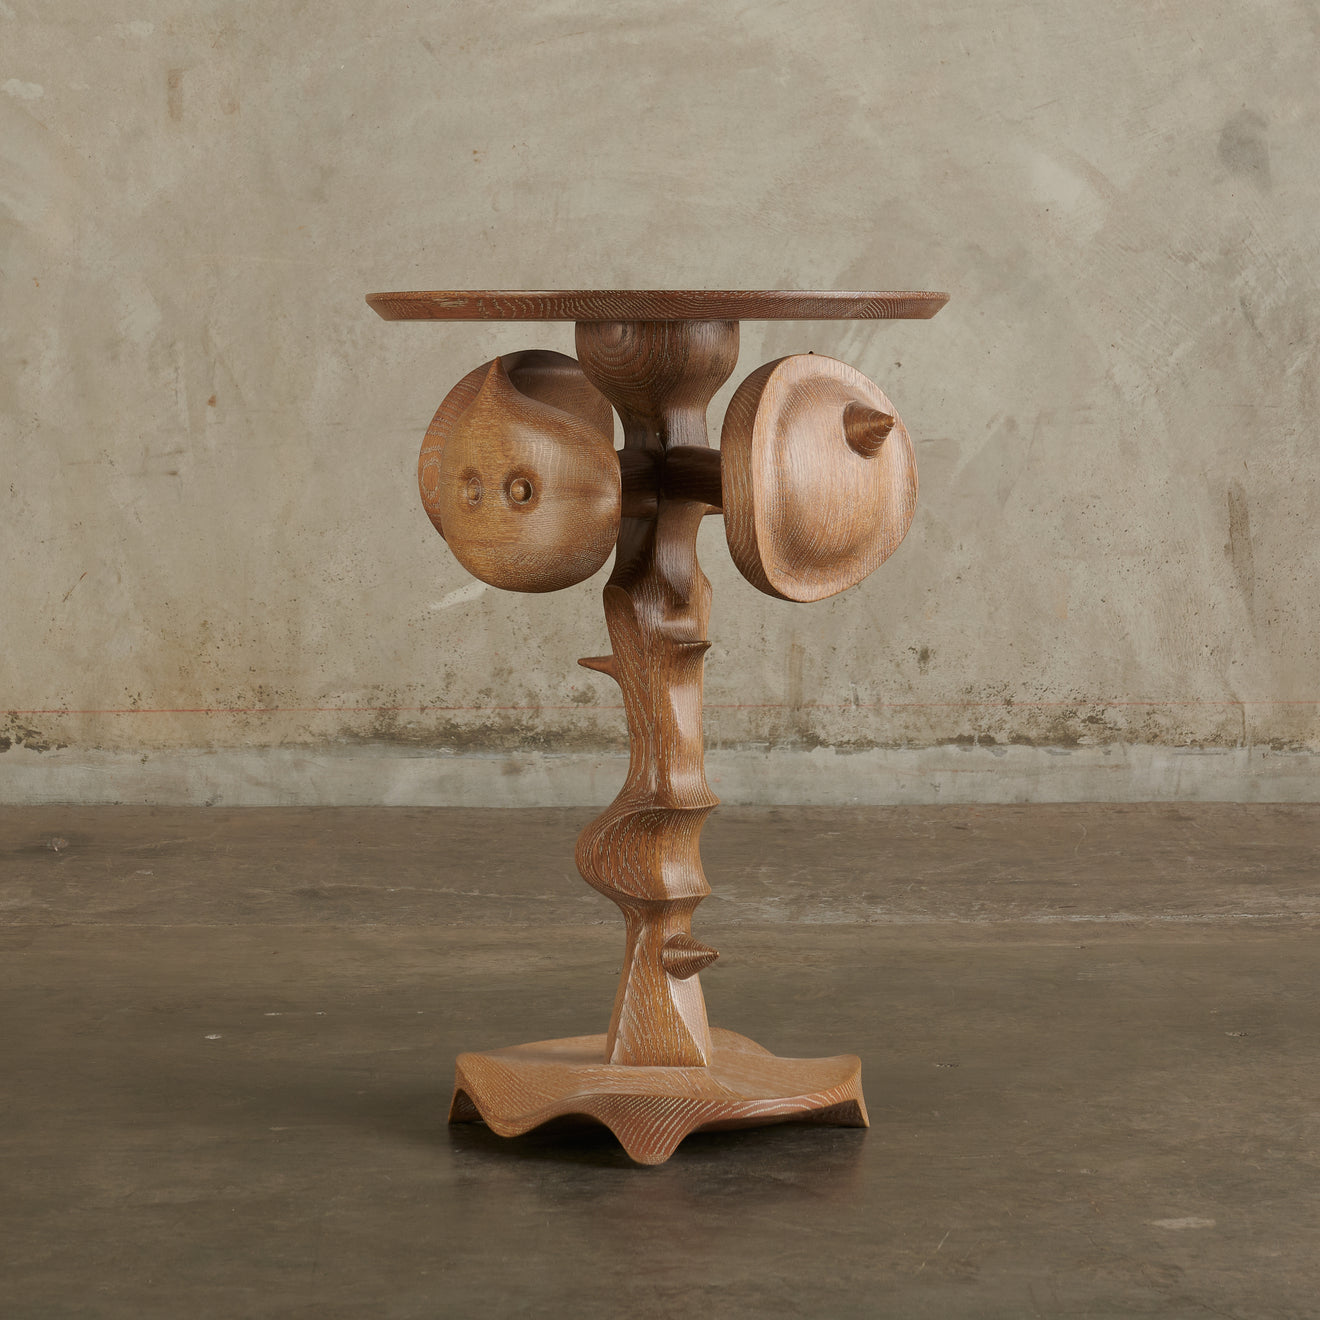 SIDE TABLE DESIGNED BY VICTOR ROMAN MANUFACTURED BY ATELIER(ER), STYLE C